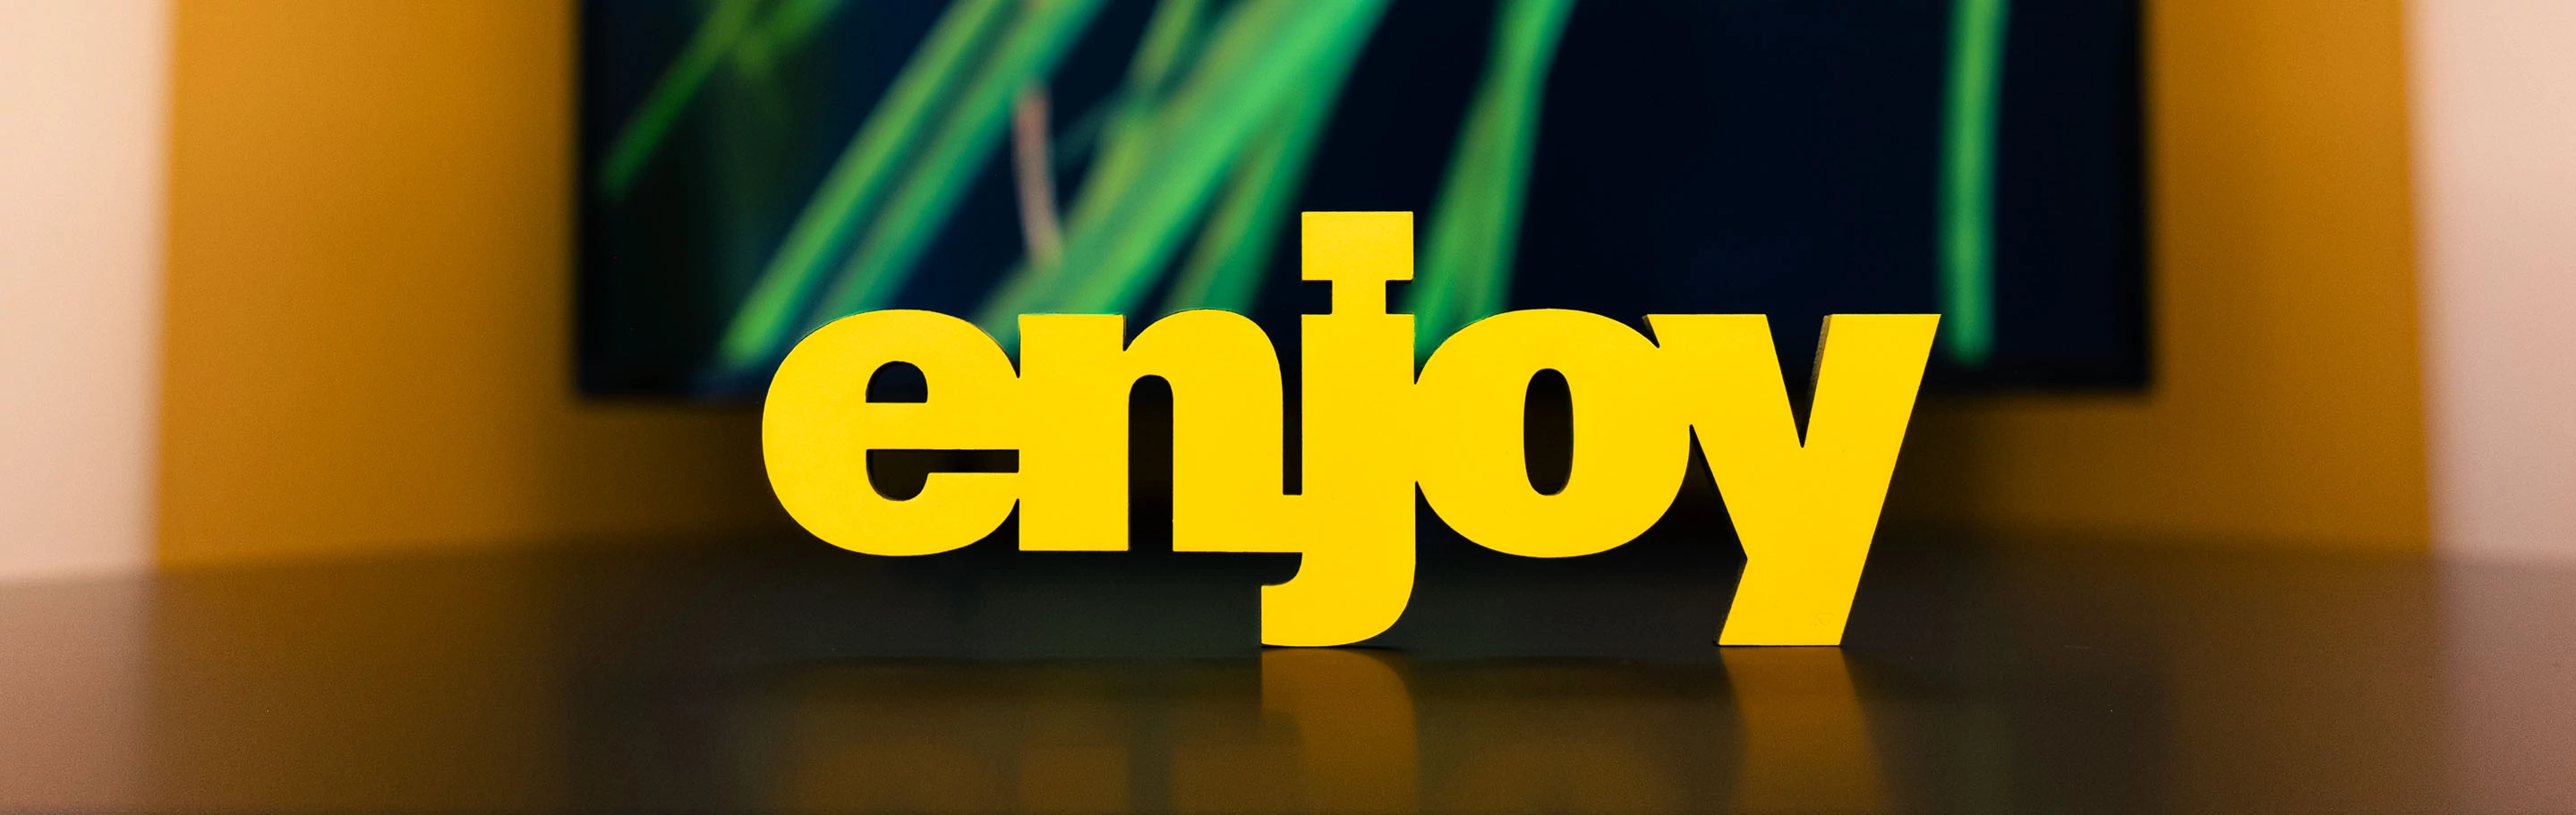 A yellow stand-up display with the word "Enjoy" against a blurred background from the agency premises